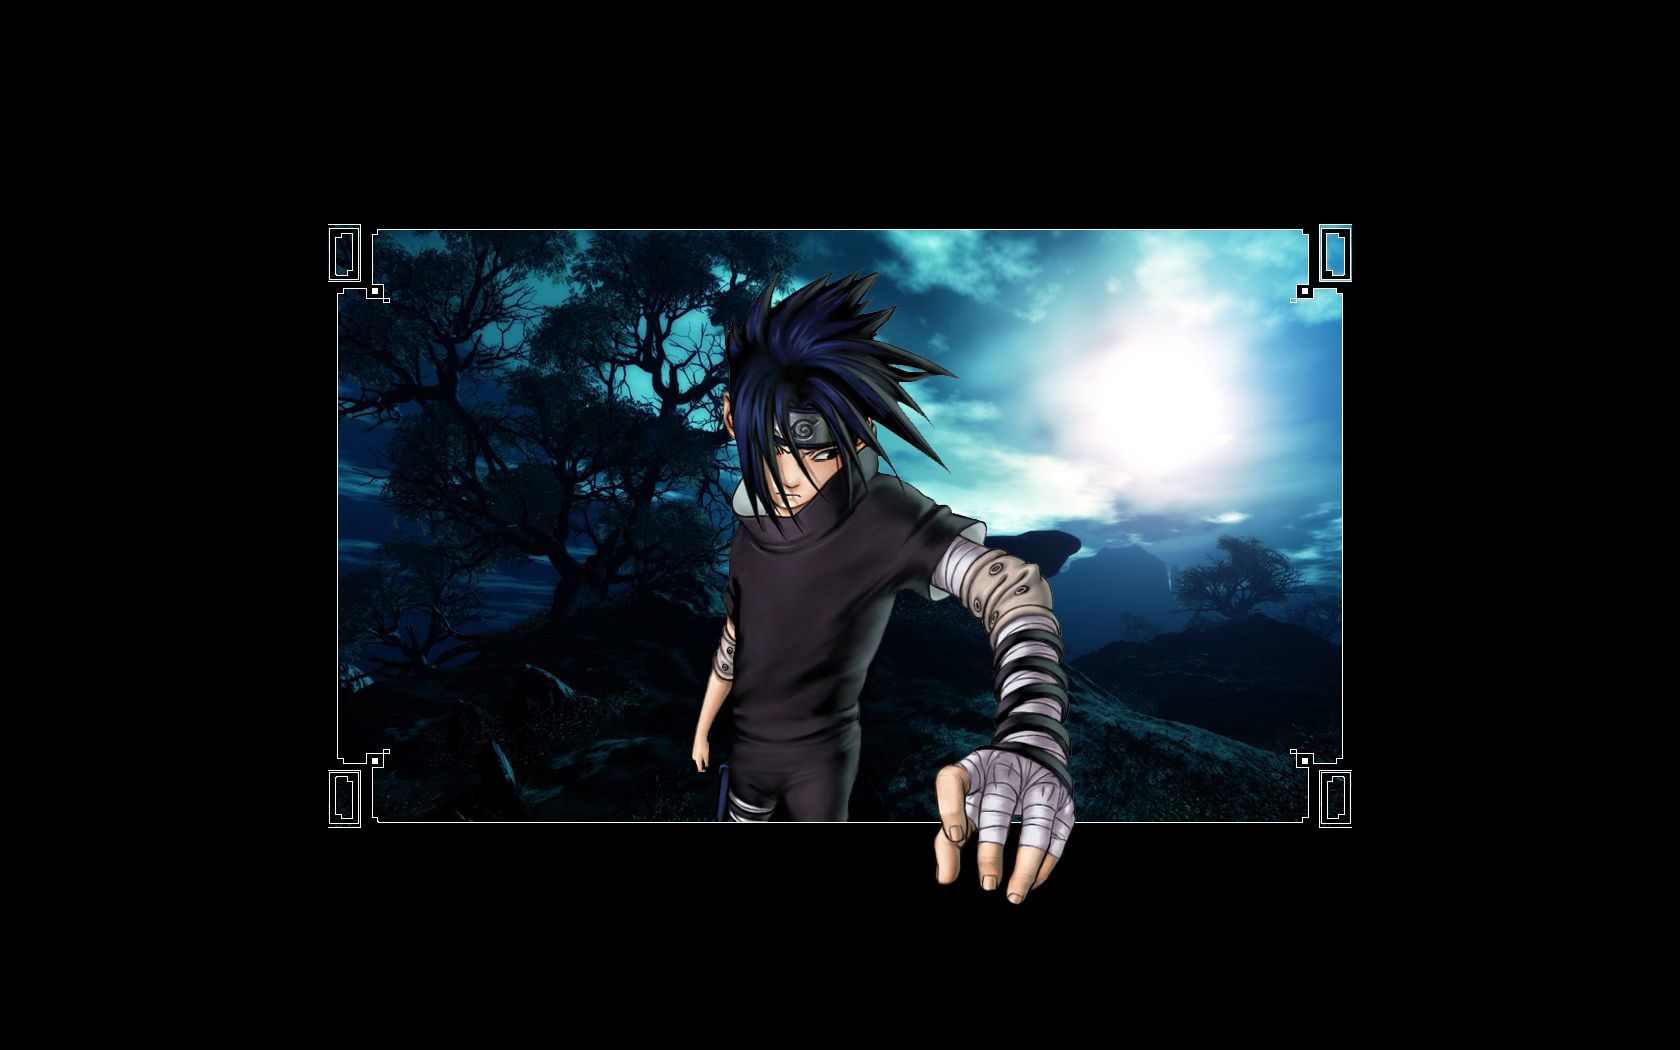 A picture of an animated character with long hair - Sasuke Uchiha